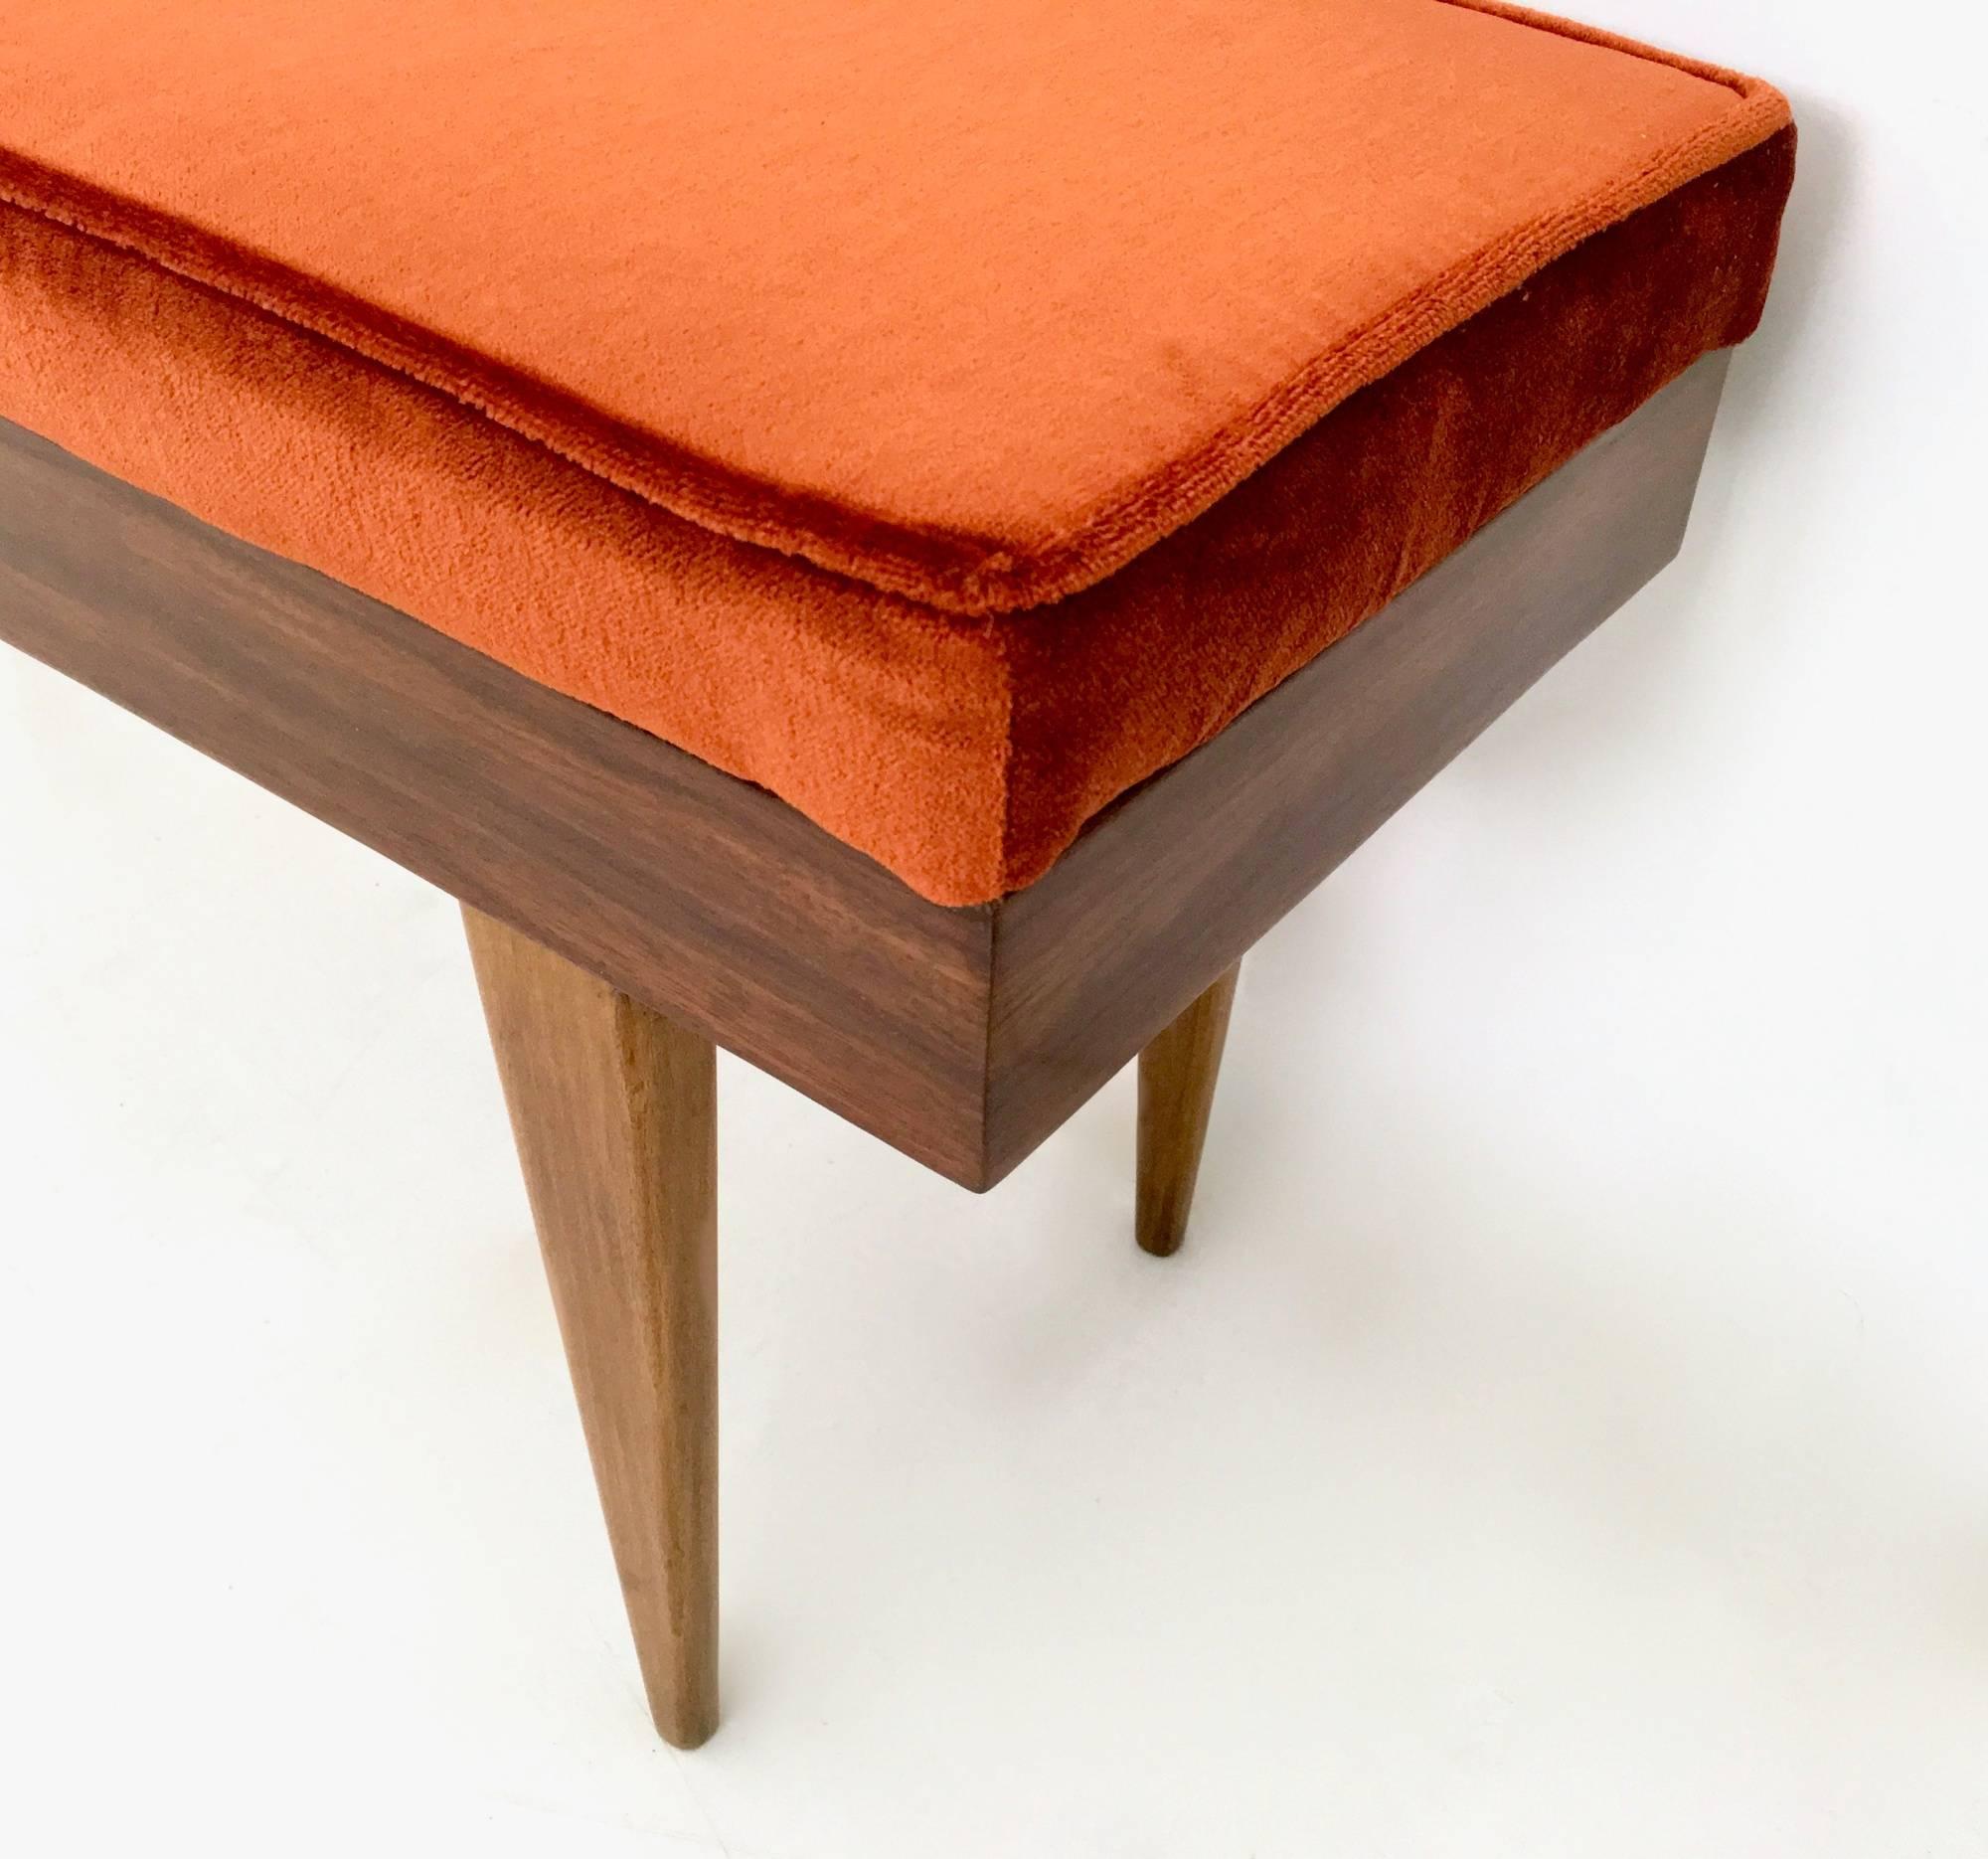 Wooden Bench with Orange Fabric Upholstery, Italy, 1950s 1